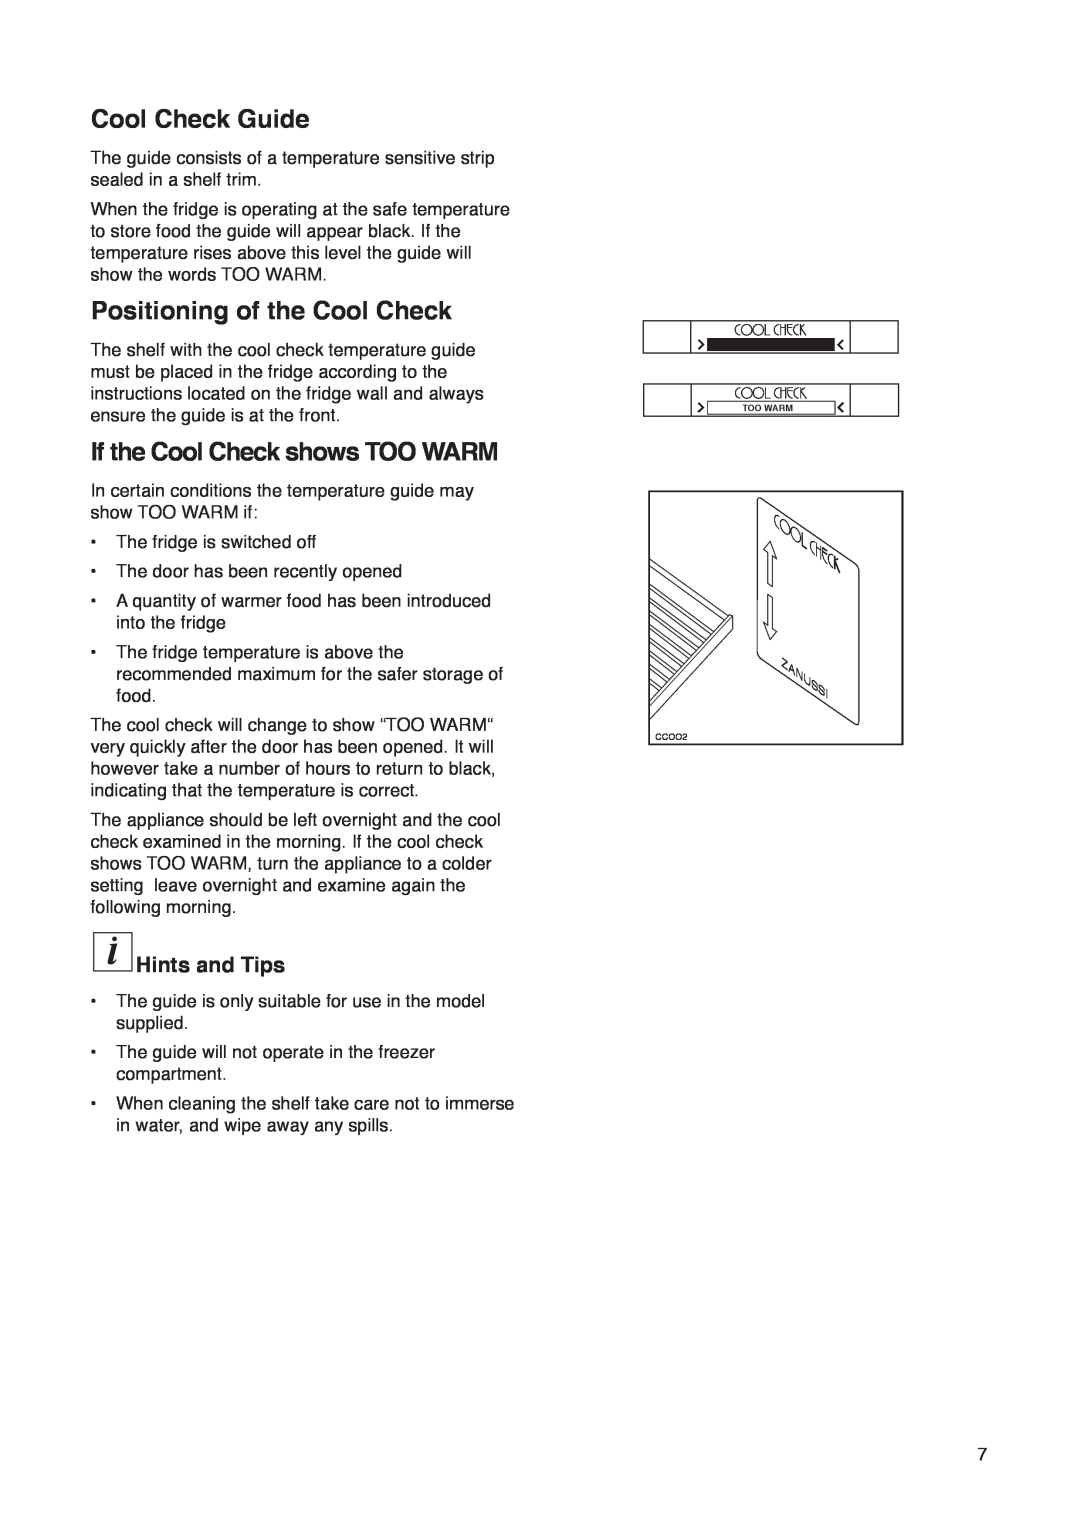 Zanussi ZK 47/52 RF Cool Check Guide, Positioning of the Cool Check, If the Cool Check shows TOO WARM, Hints and Tips 